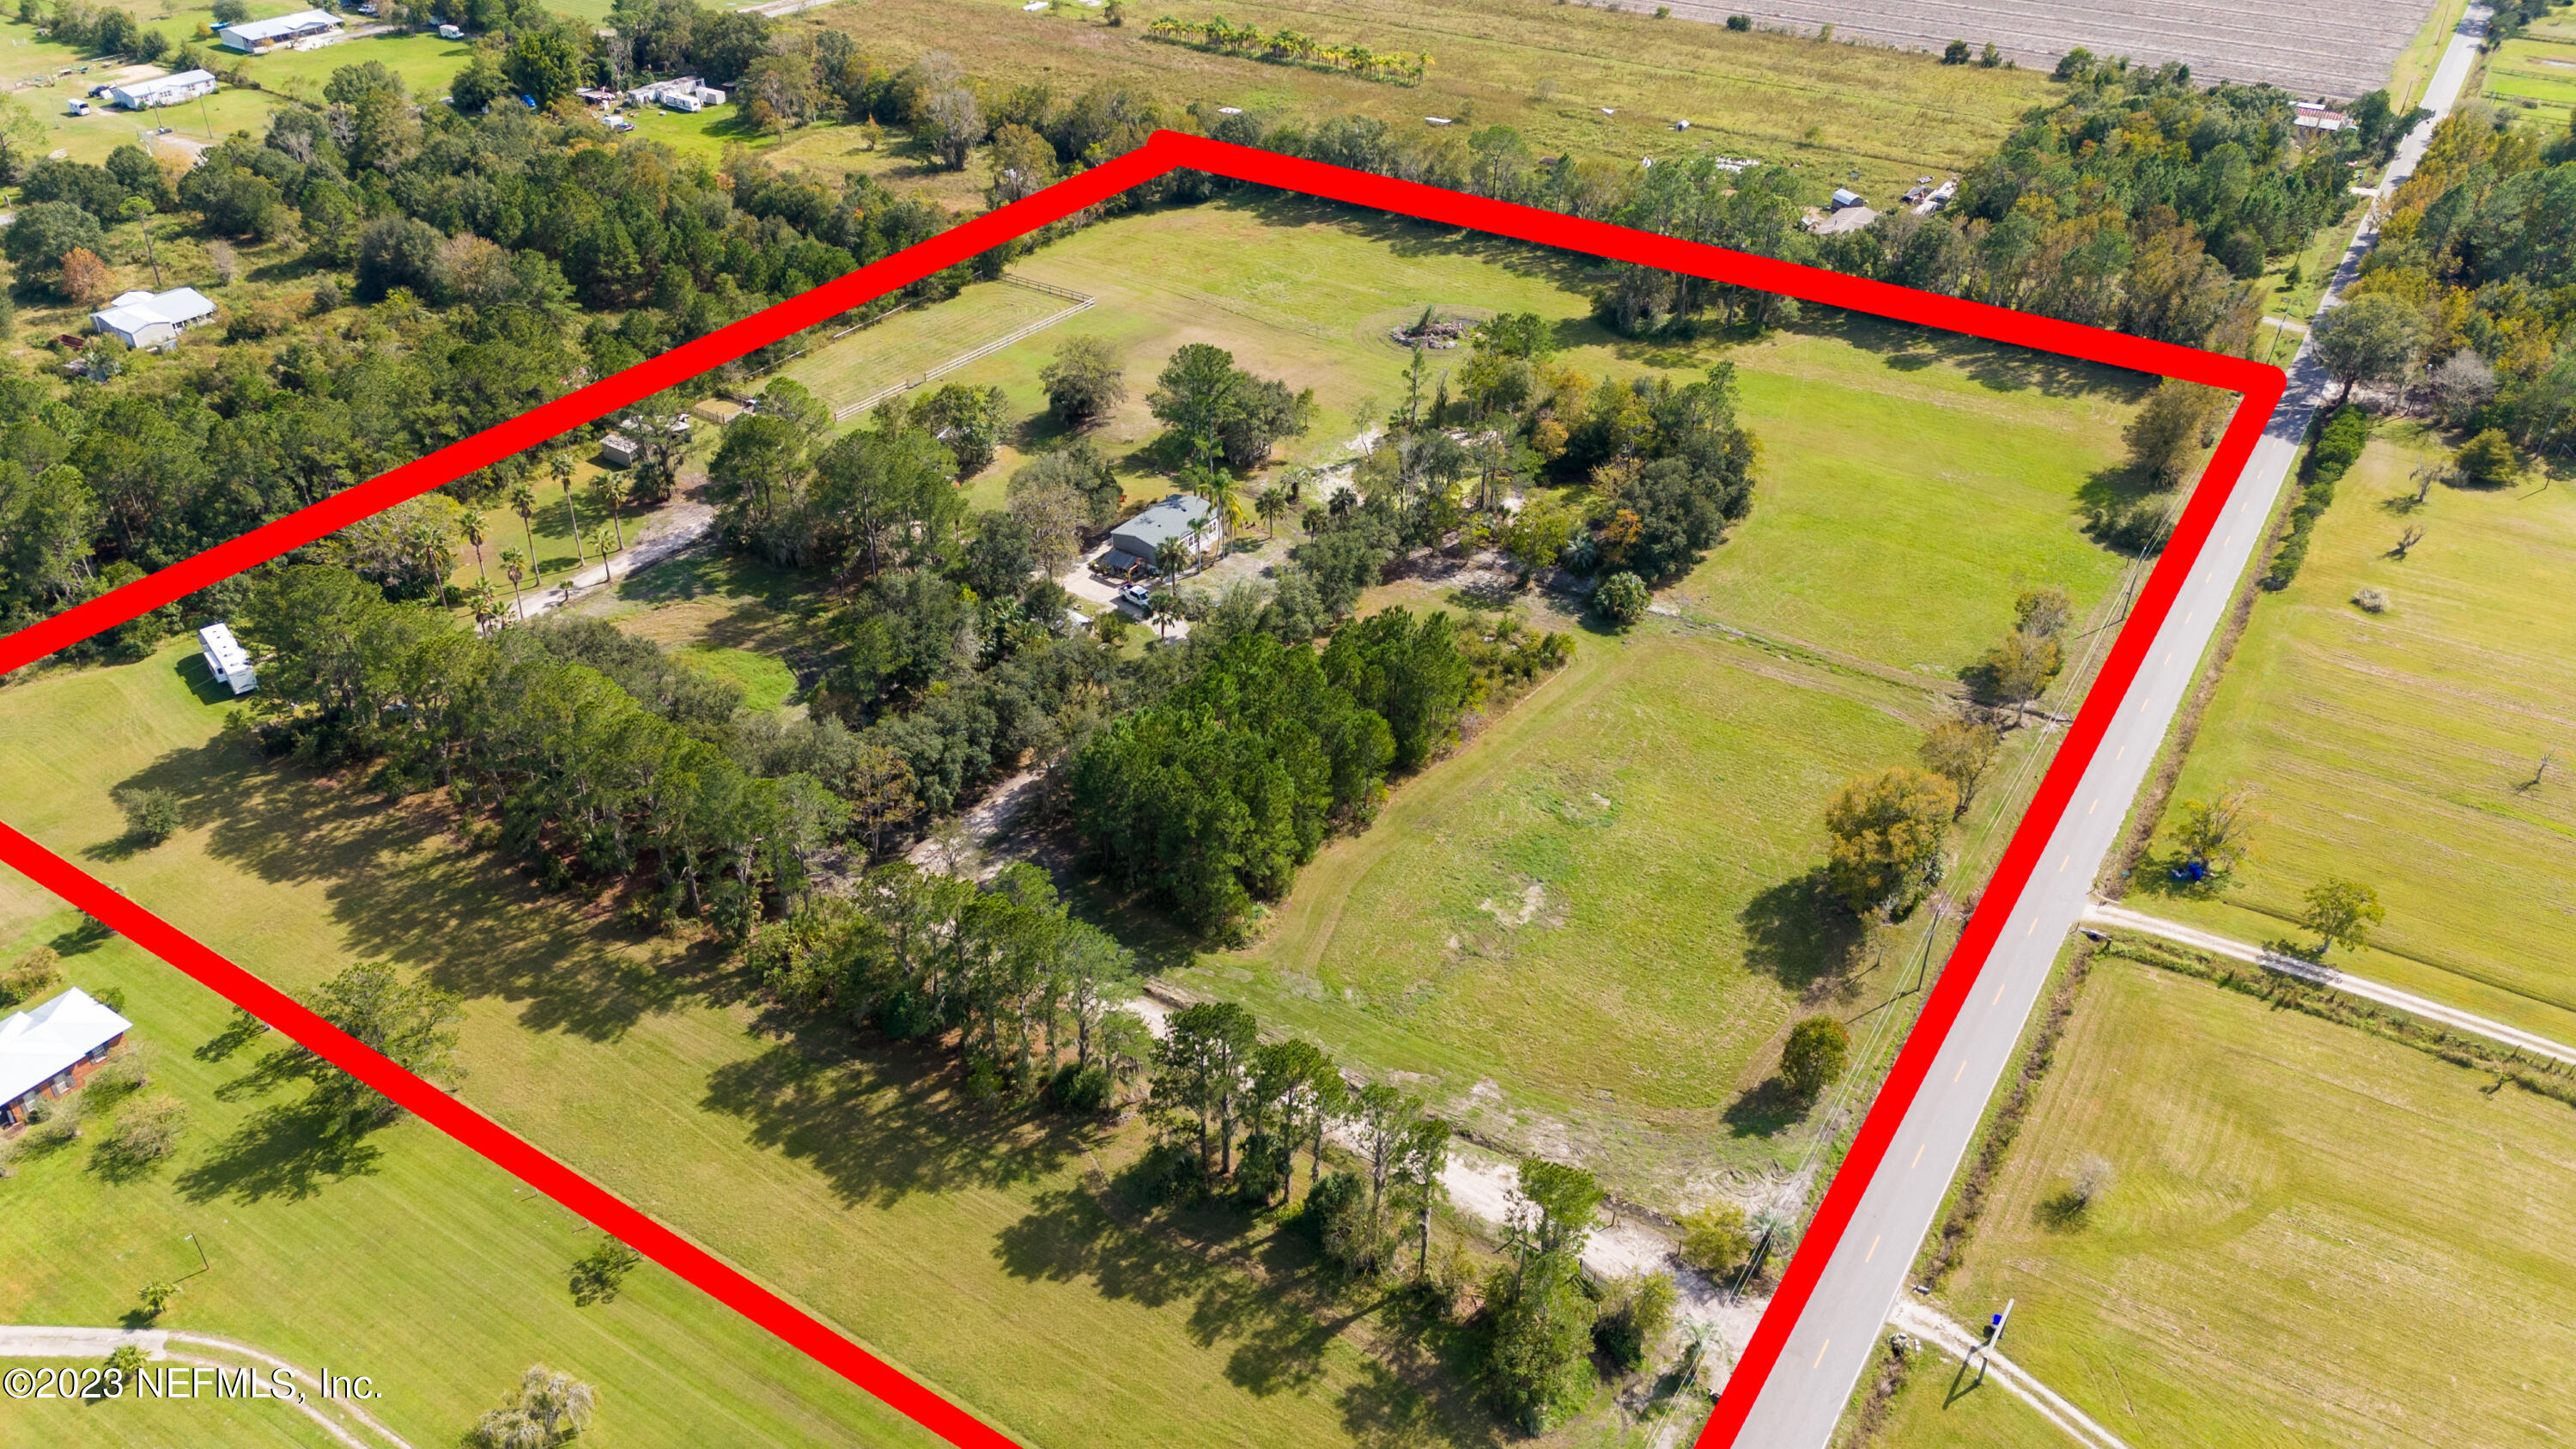 Hastings, FL home for sale located at 8888 REID PACKING HOUSE Road, Hastings, FL 32145